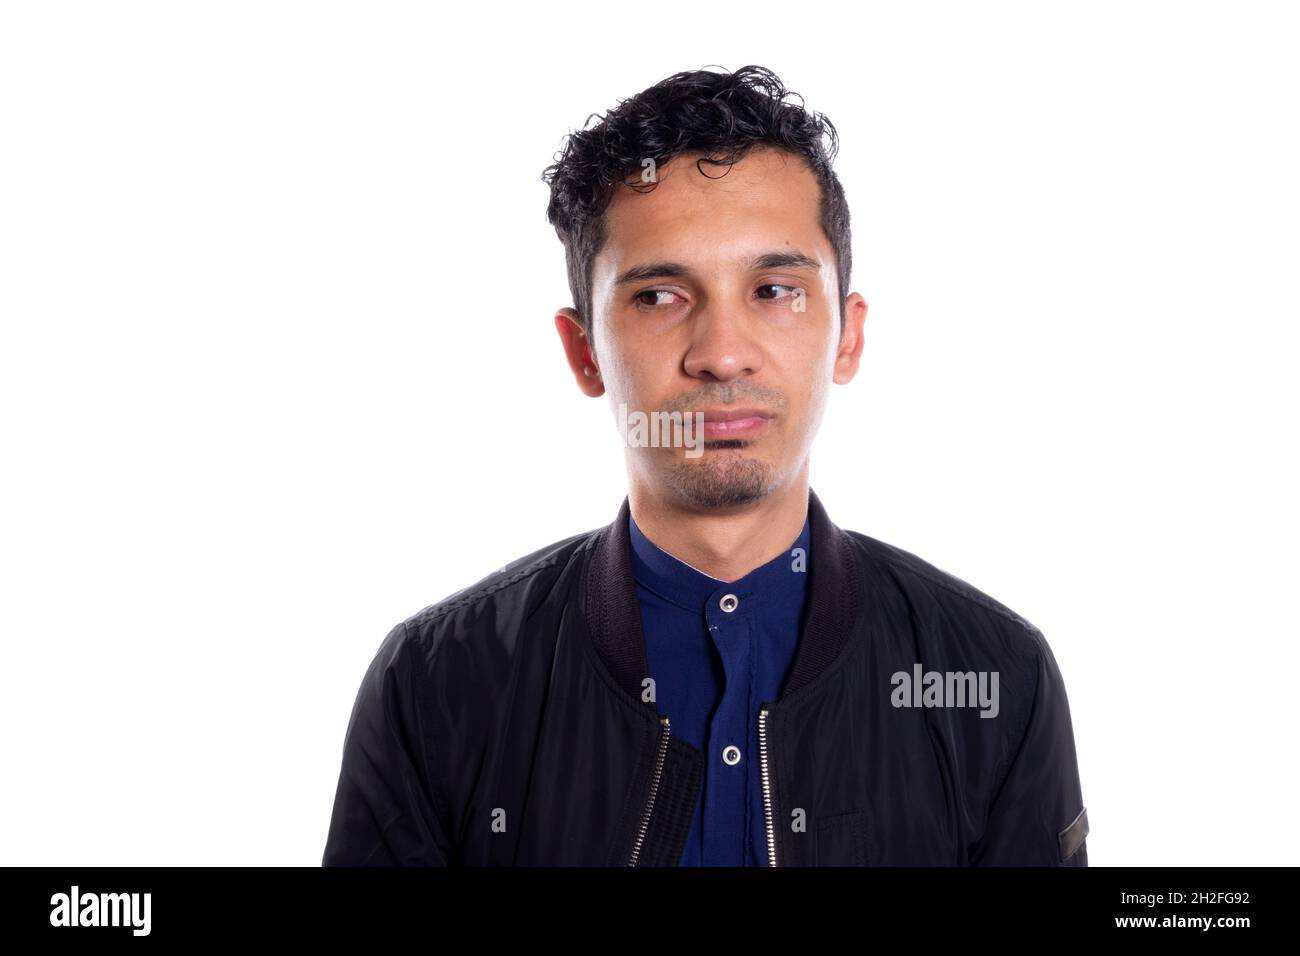 Latin man with dissatisfied face. On white background. Unamused Face. The grumpy, sullen gaze expresses dissatisfaction. Stock Photo